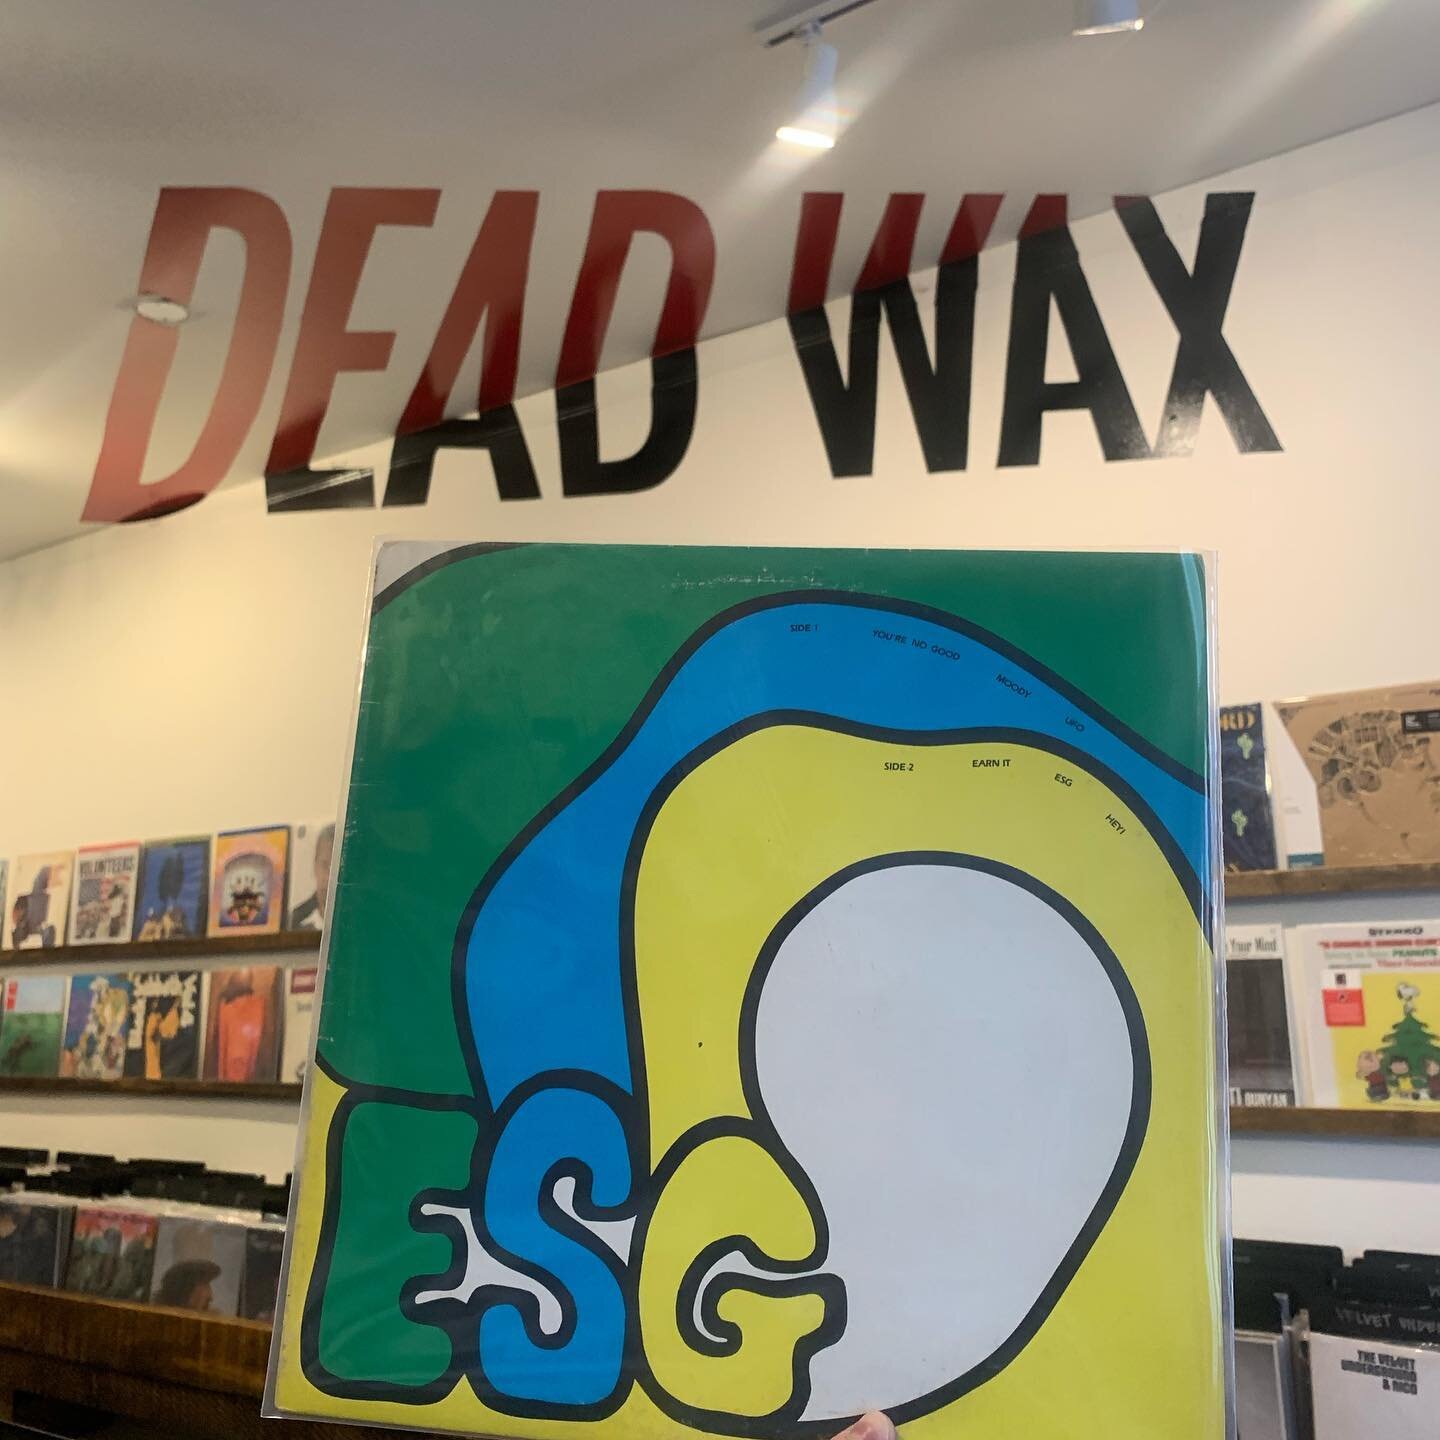 Something new going up on the wall! ESG / Sleeve and Vinyl both VG / $175 

Stop by or DM us for more info!

#newarrivals #igvinylclub #igvinylcommunity #recordsforsale #shopsmall #cherokeestreet #cherokeestreetstl